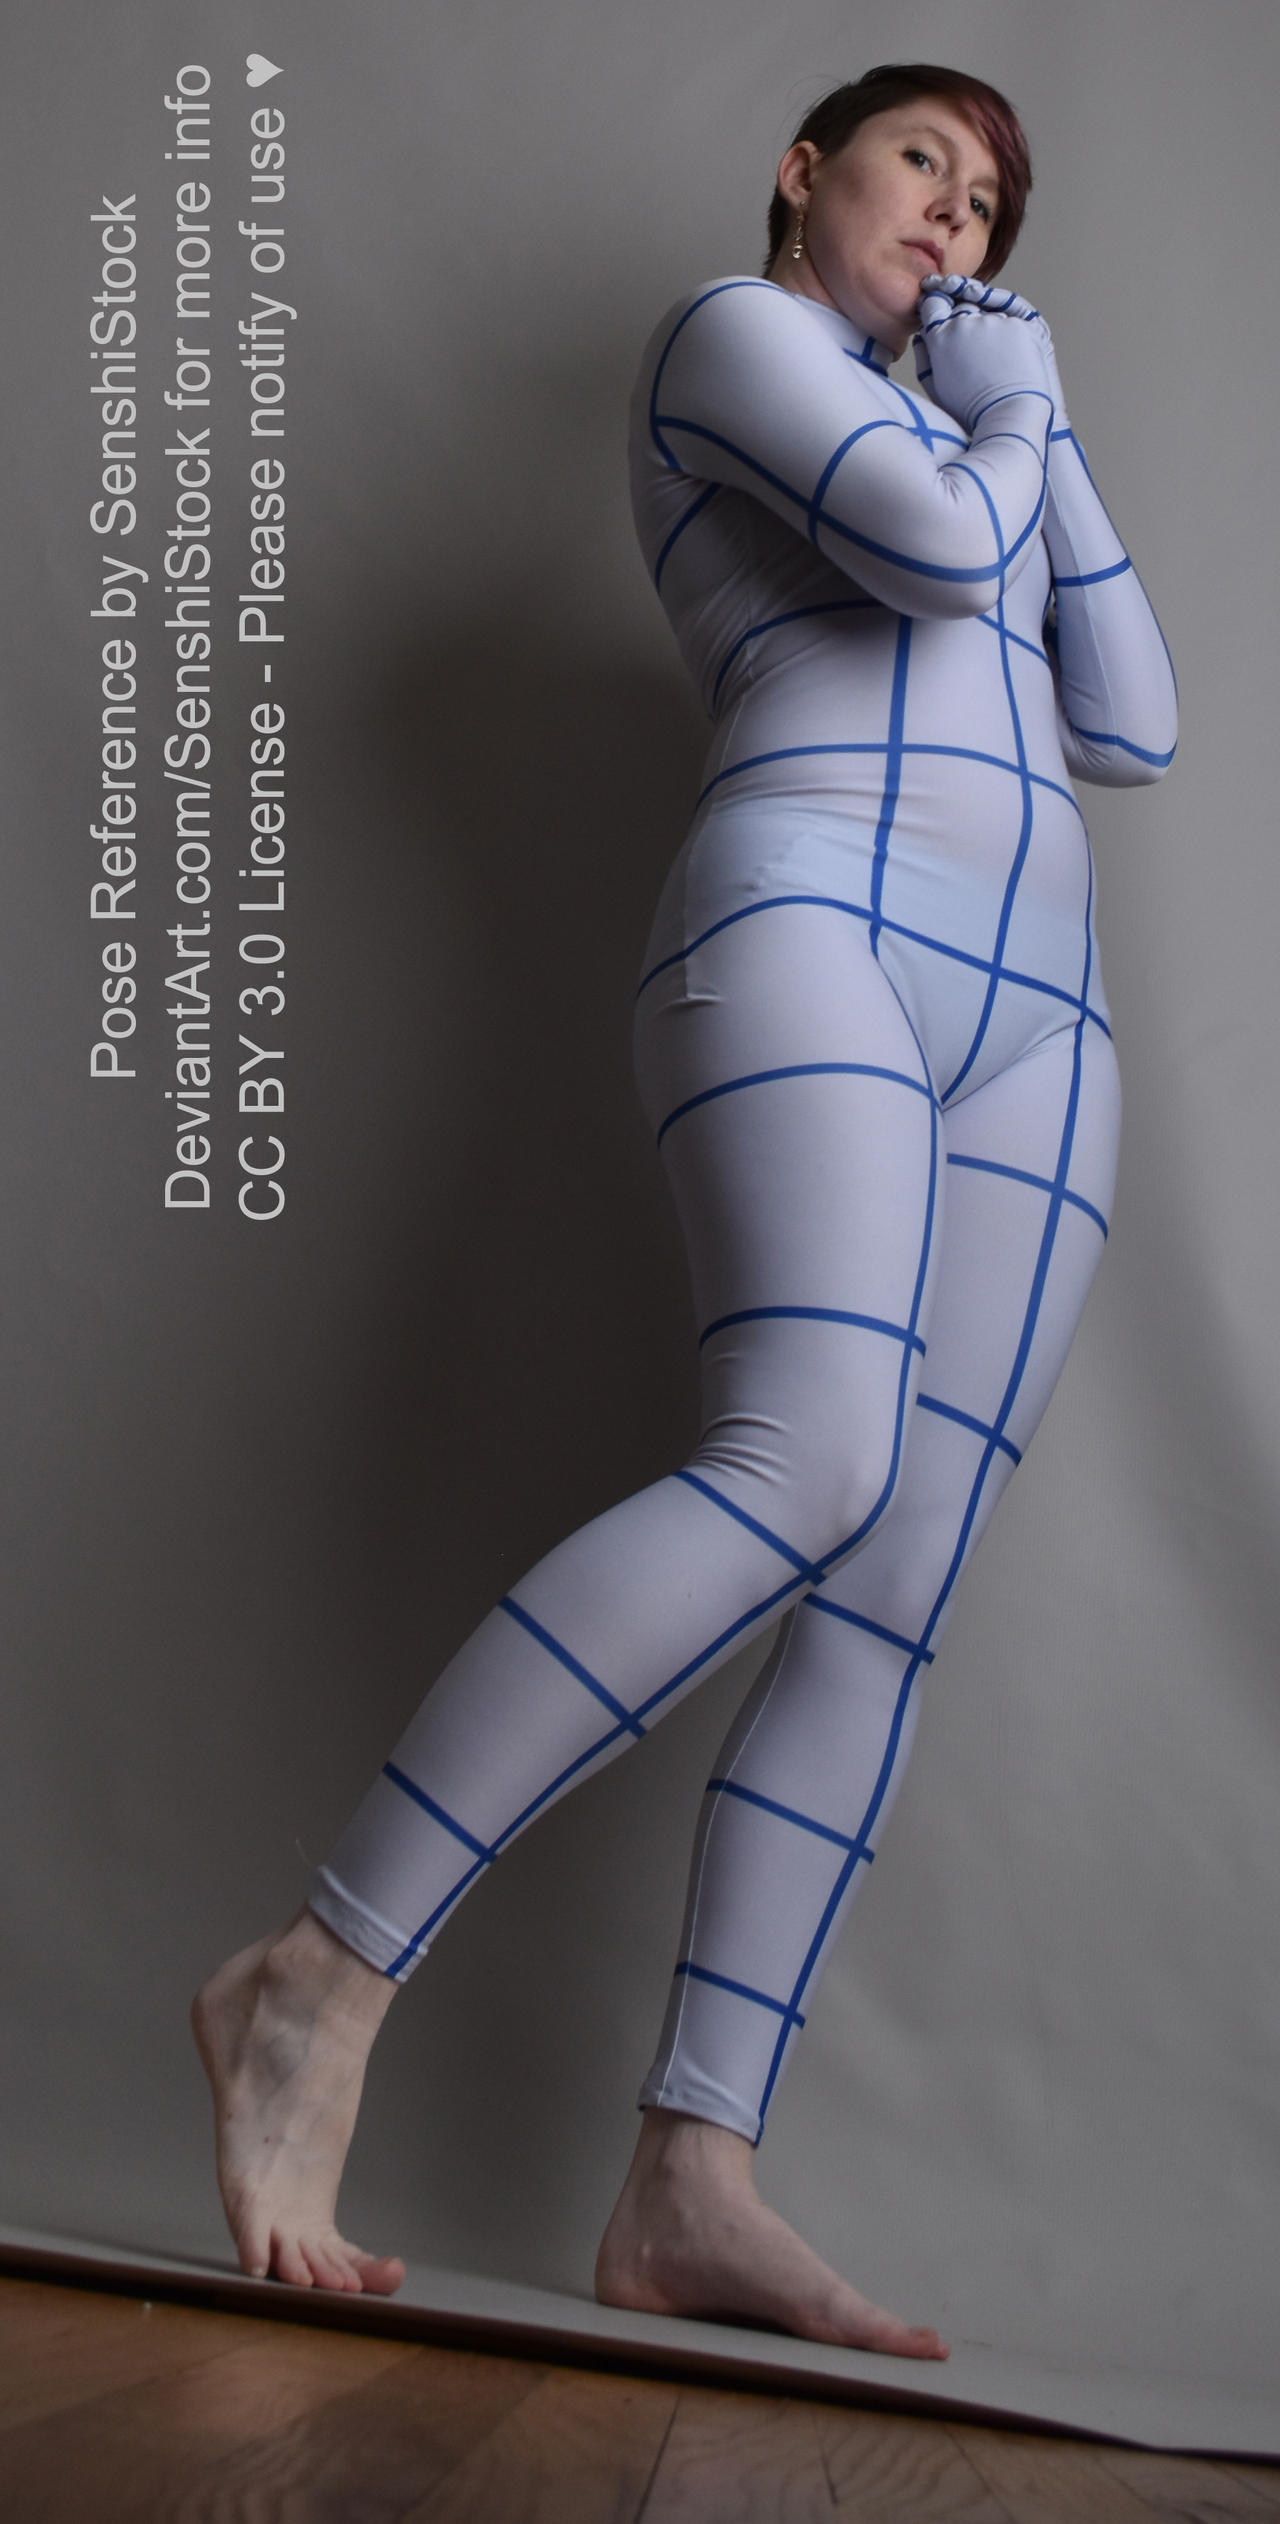 Lowe Perspective Zentai Pose Reference Cute by AdorkaStock on DeviantArt